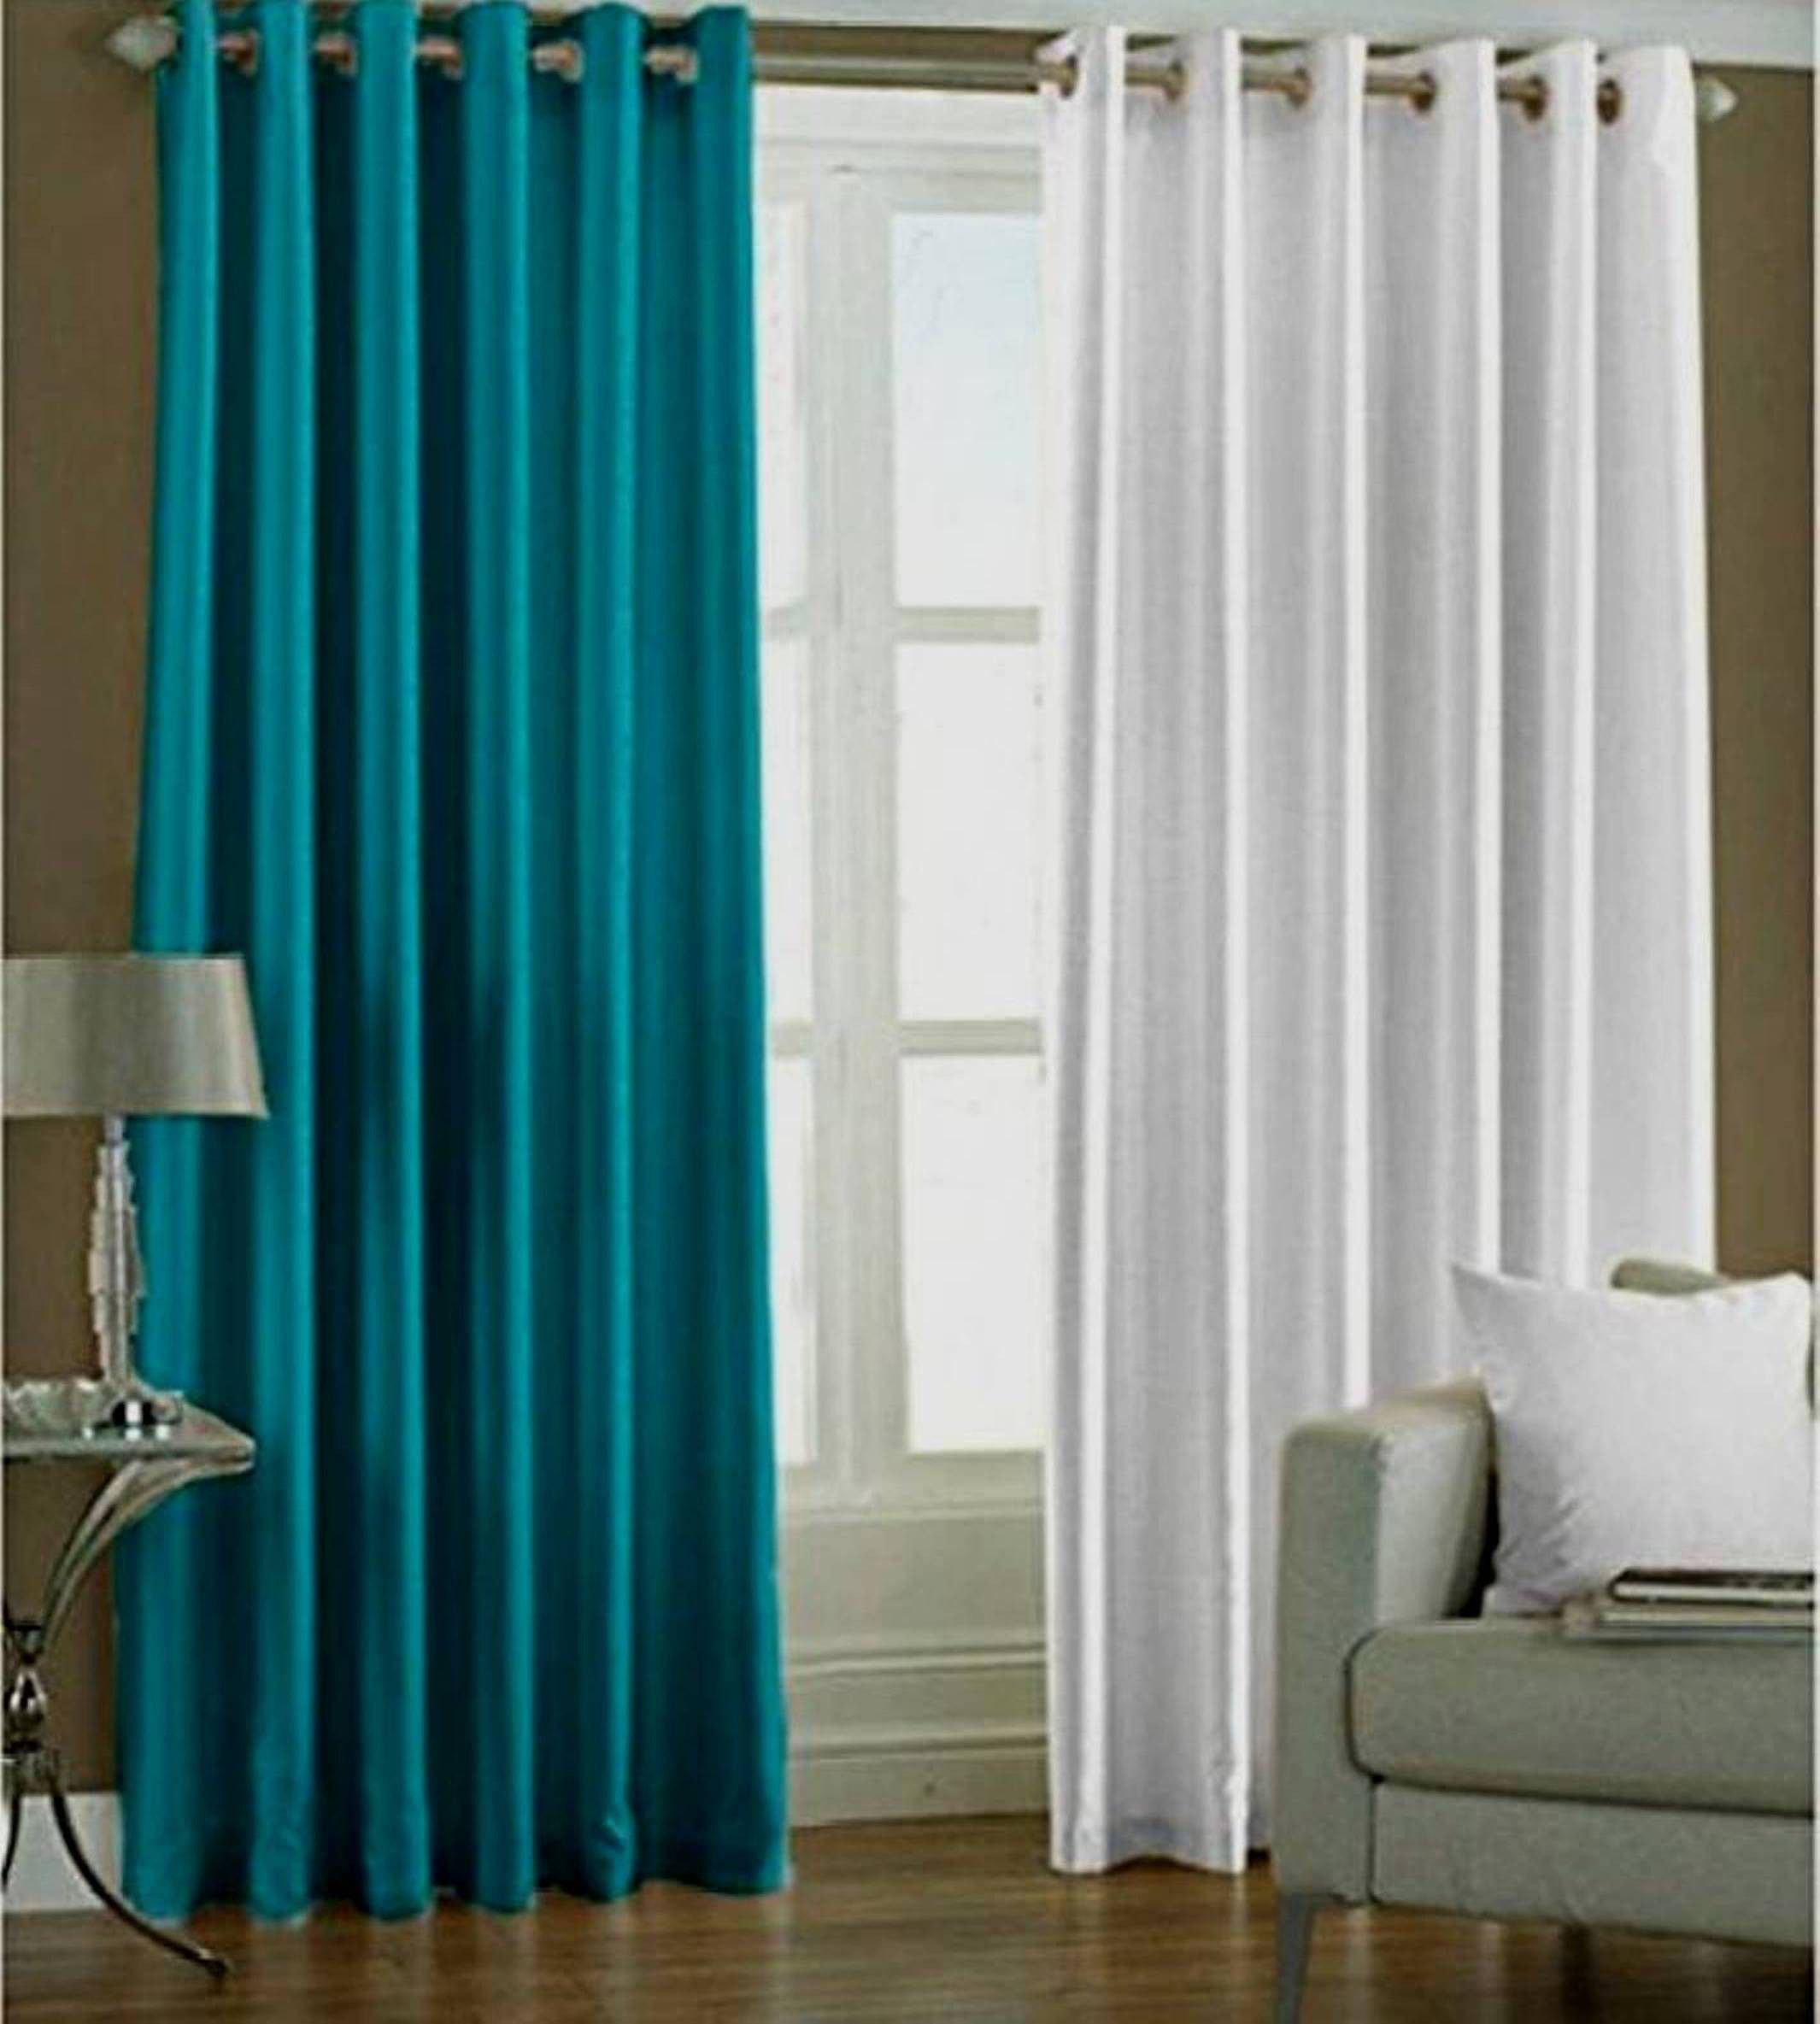     			N2C Home Solid Semi-Transparent Eyelet Curtain 9 ft ( Pack of 2 ) - Multicolor